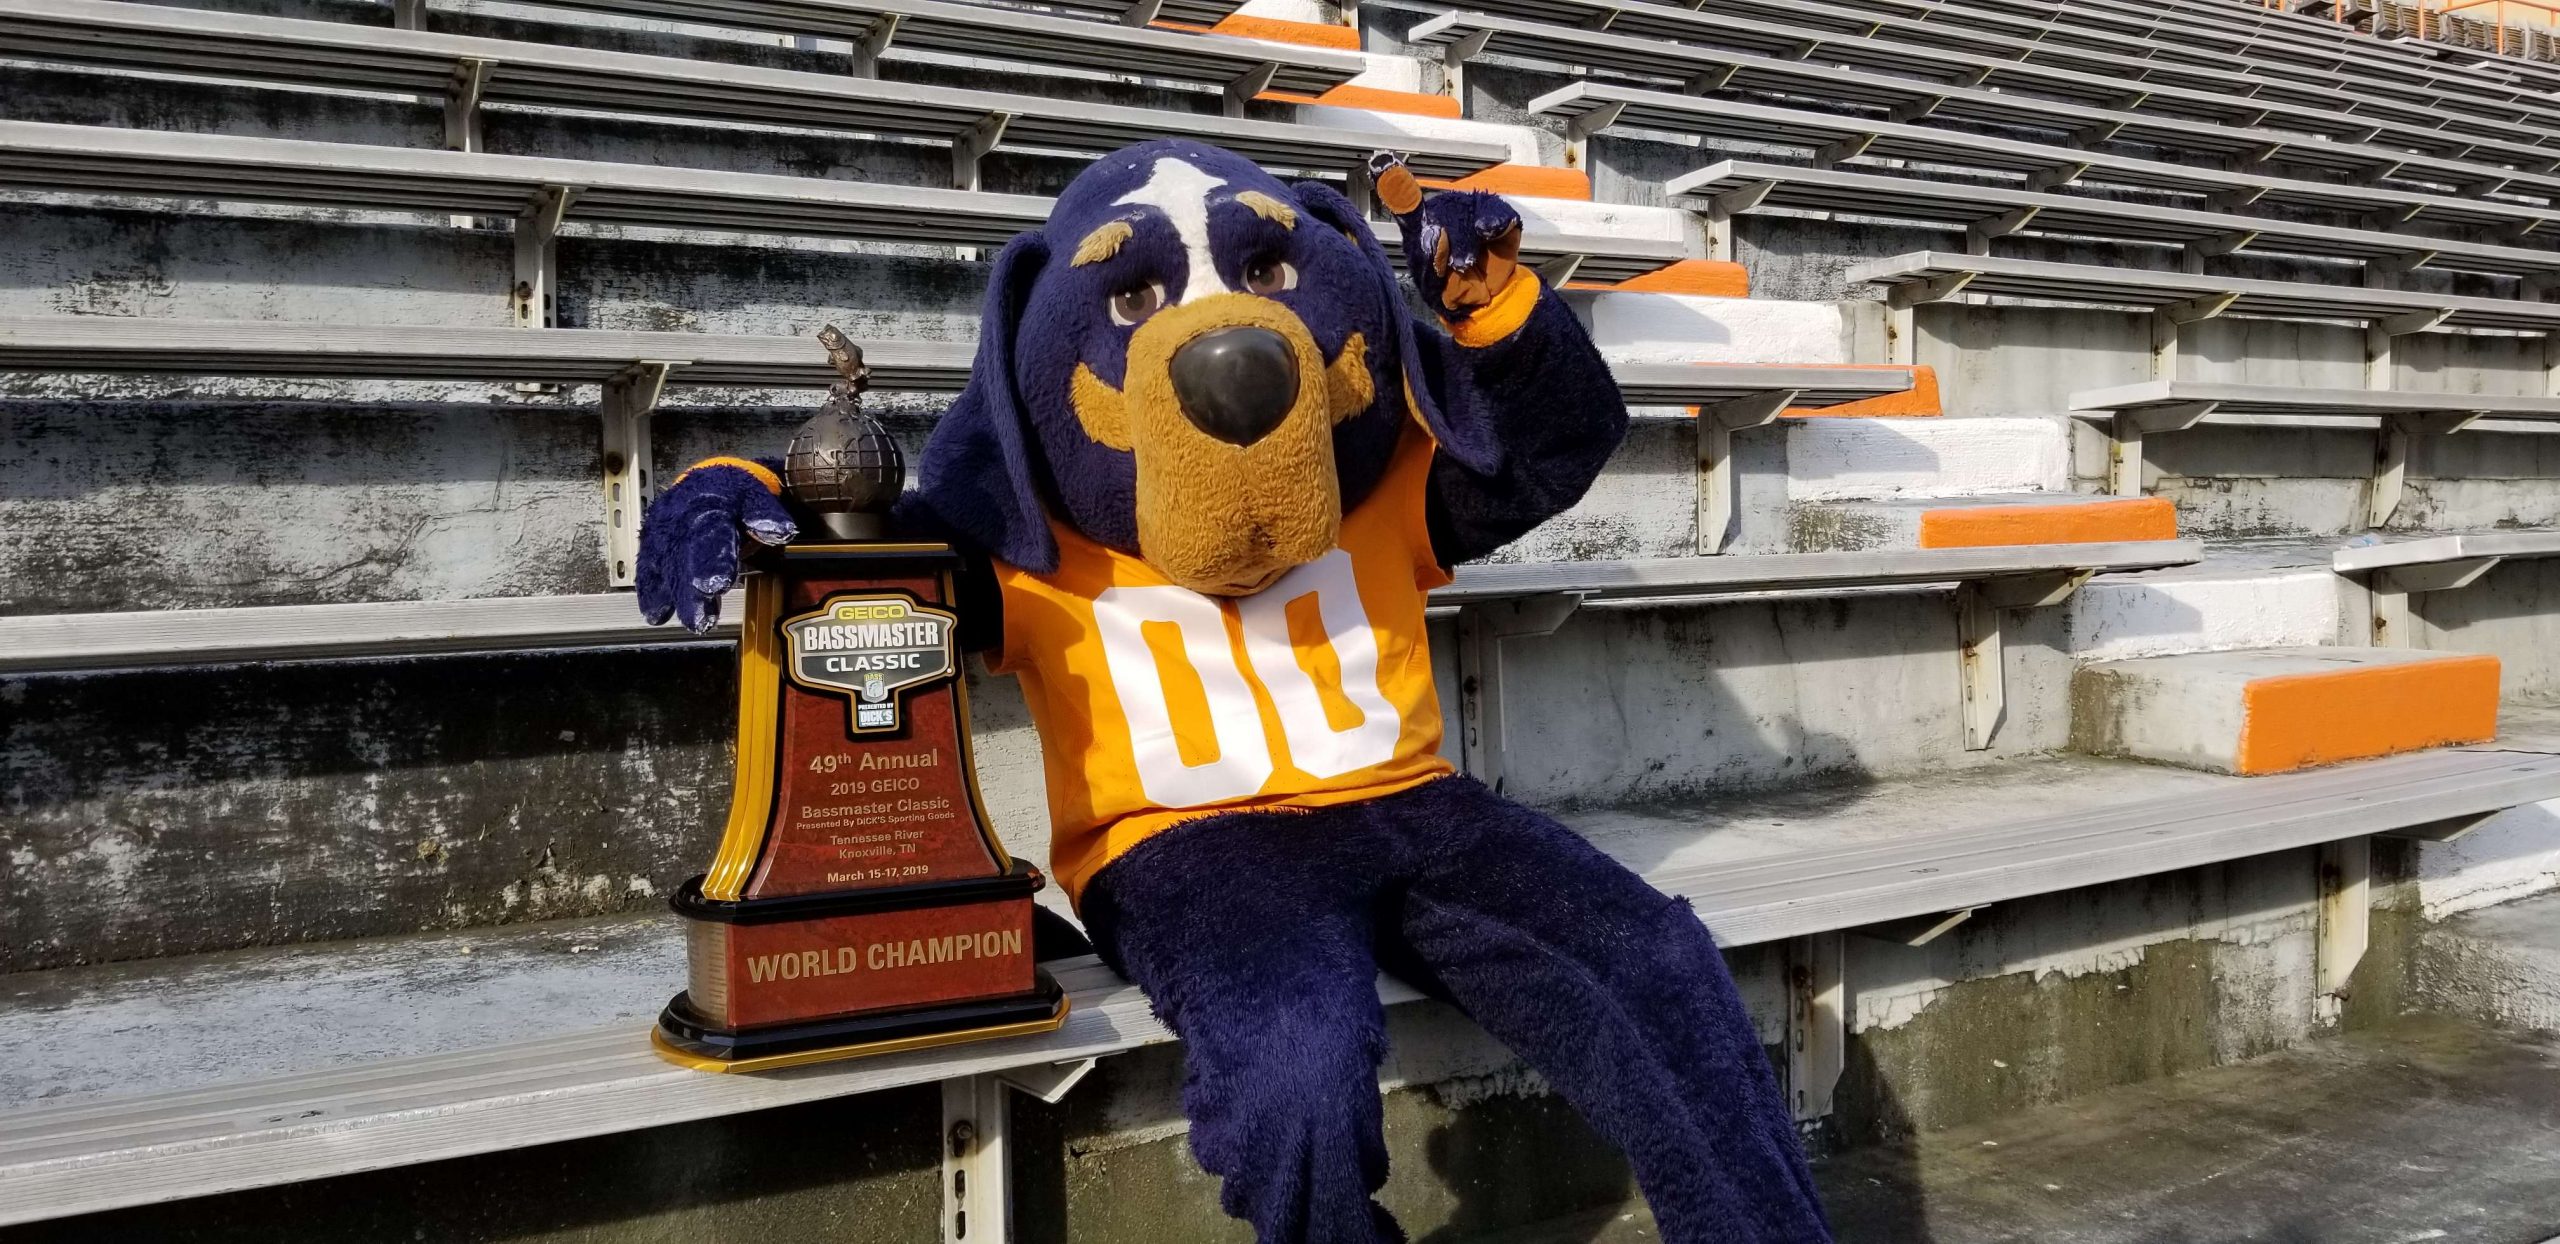 Smokey of the University of Tennessee Volunteers was ready to pose for this picture.